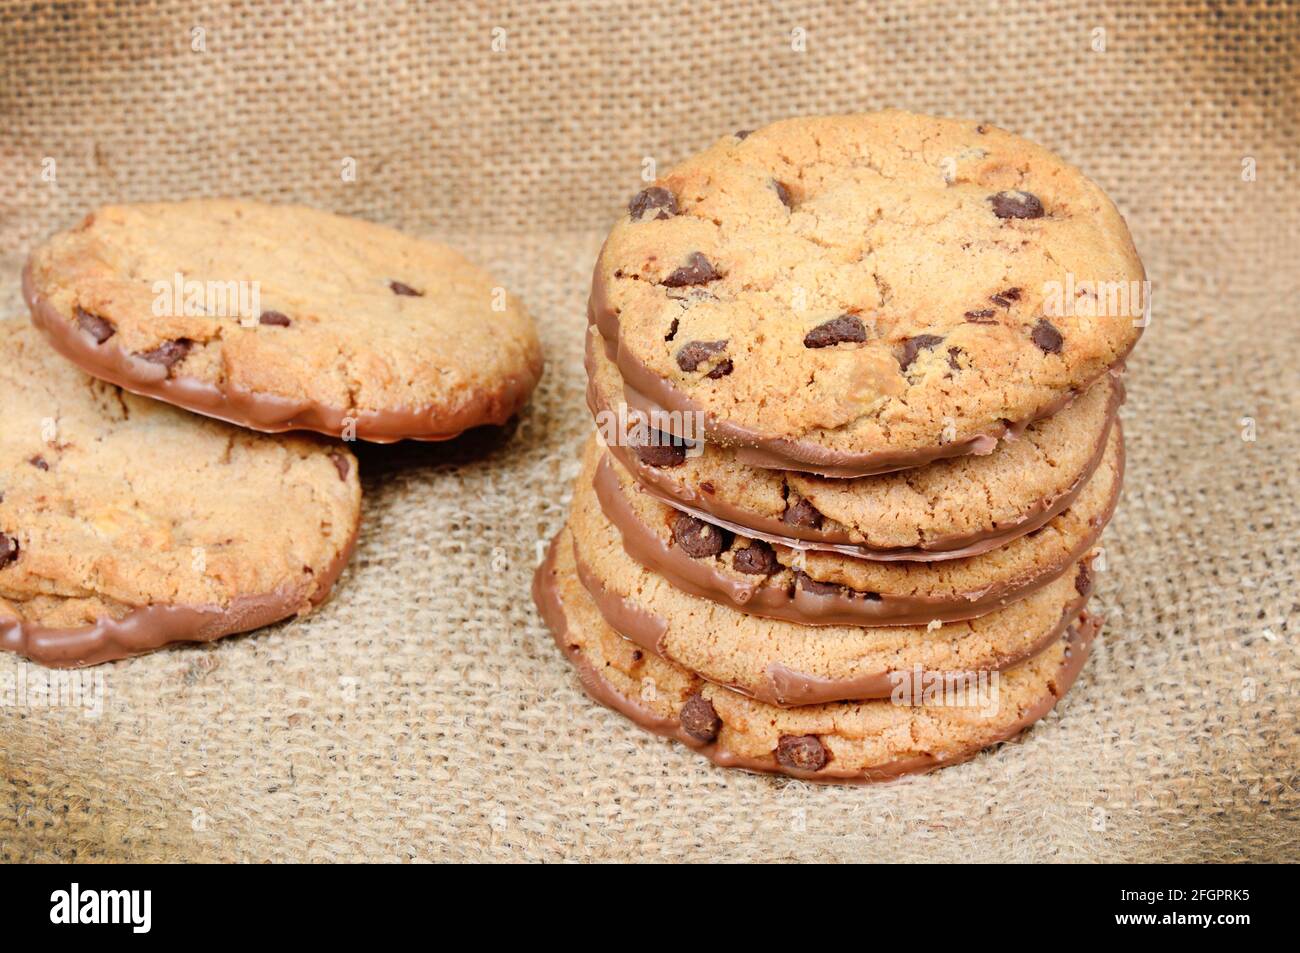 Grouo of chocolate cookies on a jute canvas close up Stock Photo